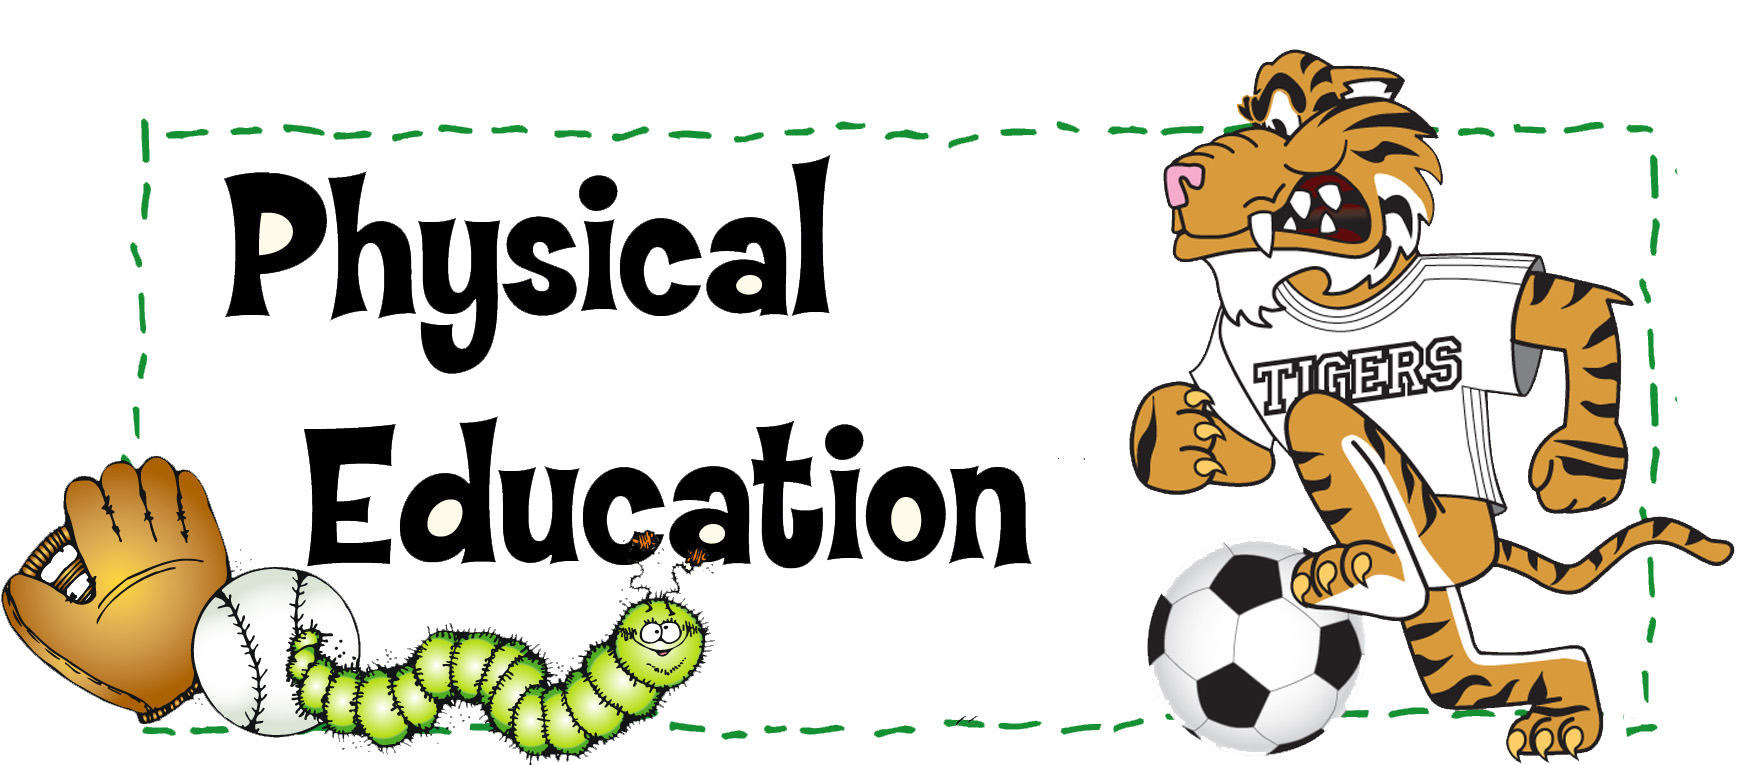 free clipart images physical education - photo #13